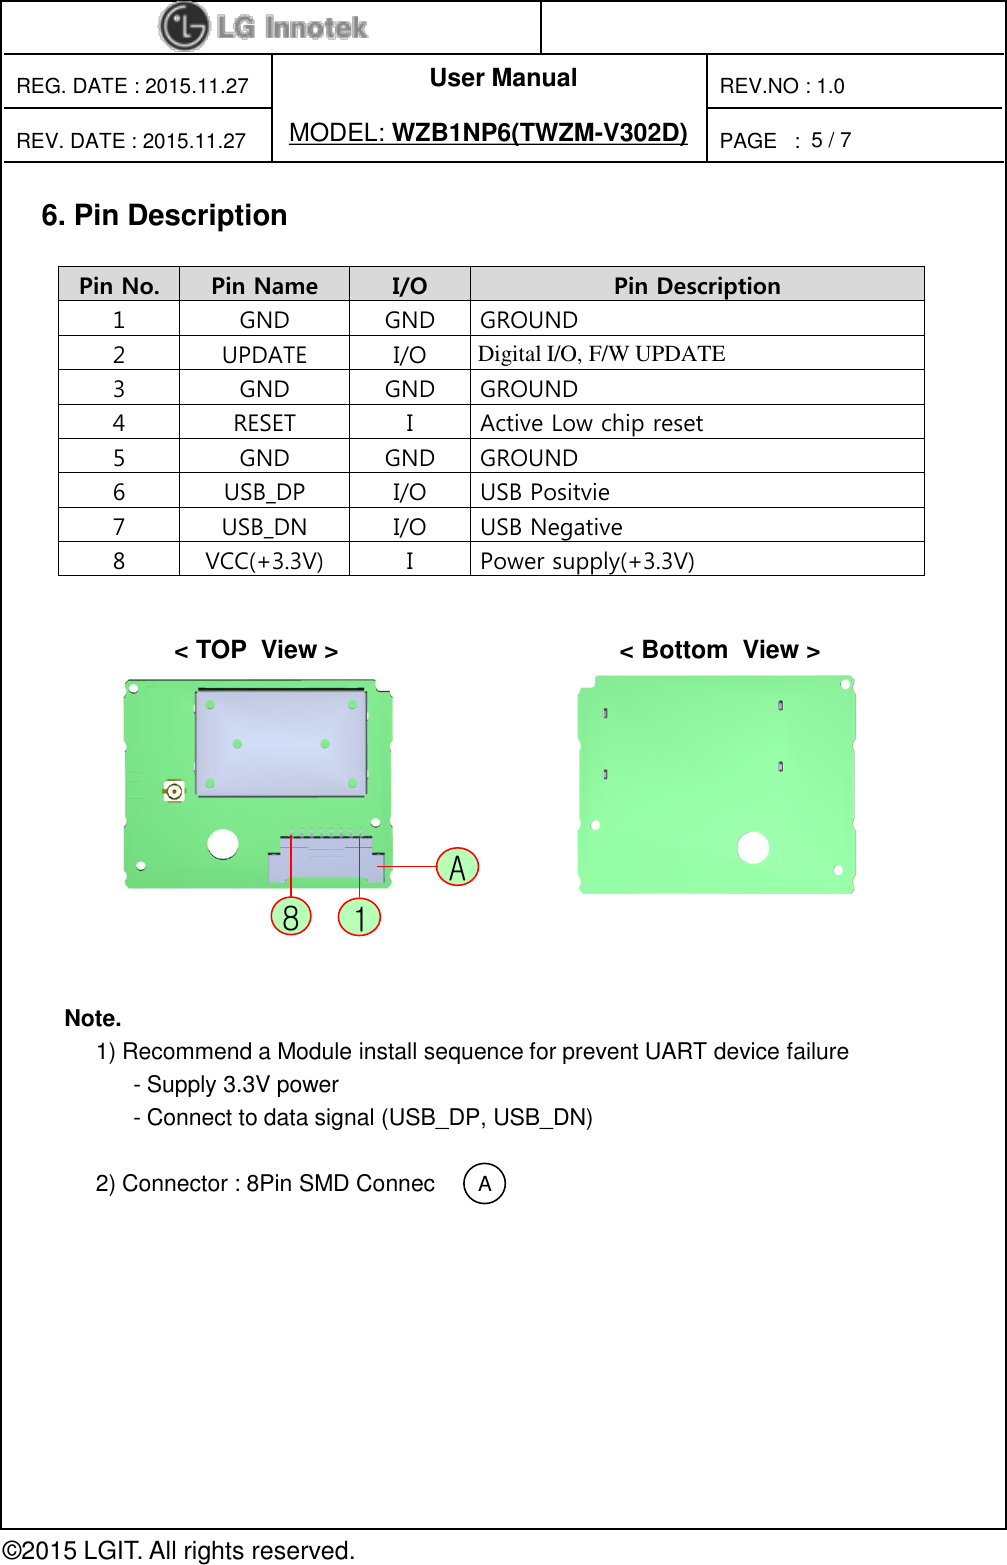 User Manual PAGE   : REG. DATE : 2015.11.27 MODEL: WZB1NP6(TWZM-V302D) REV. DATE : 2015.11.27 REV.NO : 1.0 © 2015 LGIT. All rights reserved. 5 / 7 6. Pin Description A                     &lt; TOP  View &gt;                                        &lt; Bottom  View &gt;                        1 8 A Pin No. Pin Name  I/O  Pin Description 1  GND  GND  GROUND 2  UPDATE  I/O  Digital I/O, F/W UPDATE 3  GND  GND  GROUND 4  RESET  I  Active Low chip reset 5  GND  GND  GROUND 6  USB_DP  I/O  USB Positvie 7  USB_DN  I/O  USB Negative 8  VCC(+3.3V)  I  Power supply(+3.3V)  Note.       1) Recommend a Module install sequence for prevent UART device failure             - Supply 3.3V power              - Connect to data signal (USB_DP, USB_DN)        2) Connector : 8Pin SMD Connec  